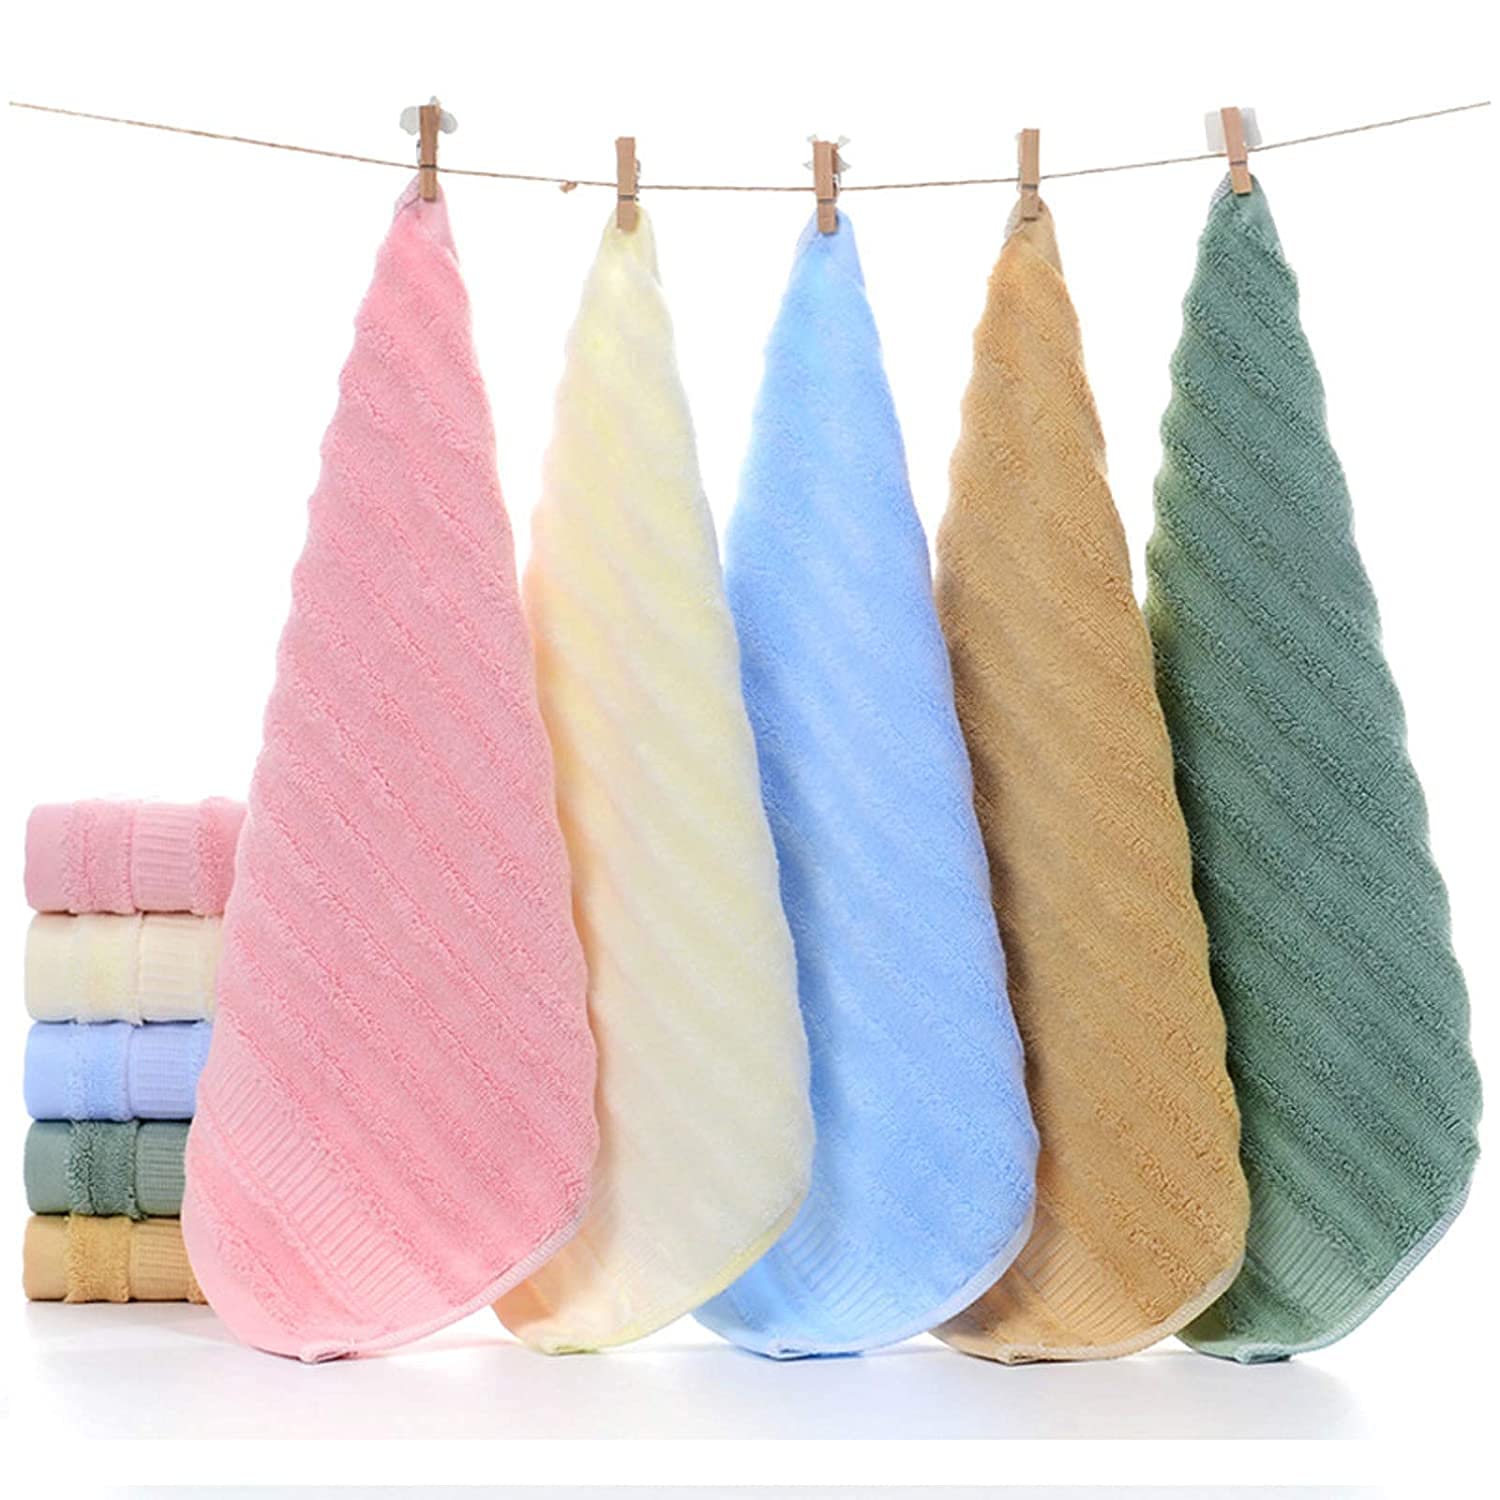 Mush Bamboo Face Towel Set of 7 - Assorted | 100% Bamboo |Ultra Soft, Absorbent & Quick Dry Towel for facewash, Gym, Pool, Travel, Spa, Beauty Salon and Yoga | 14 x 14 Inches 500 GSM